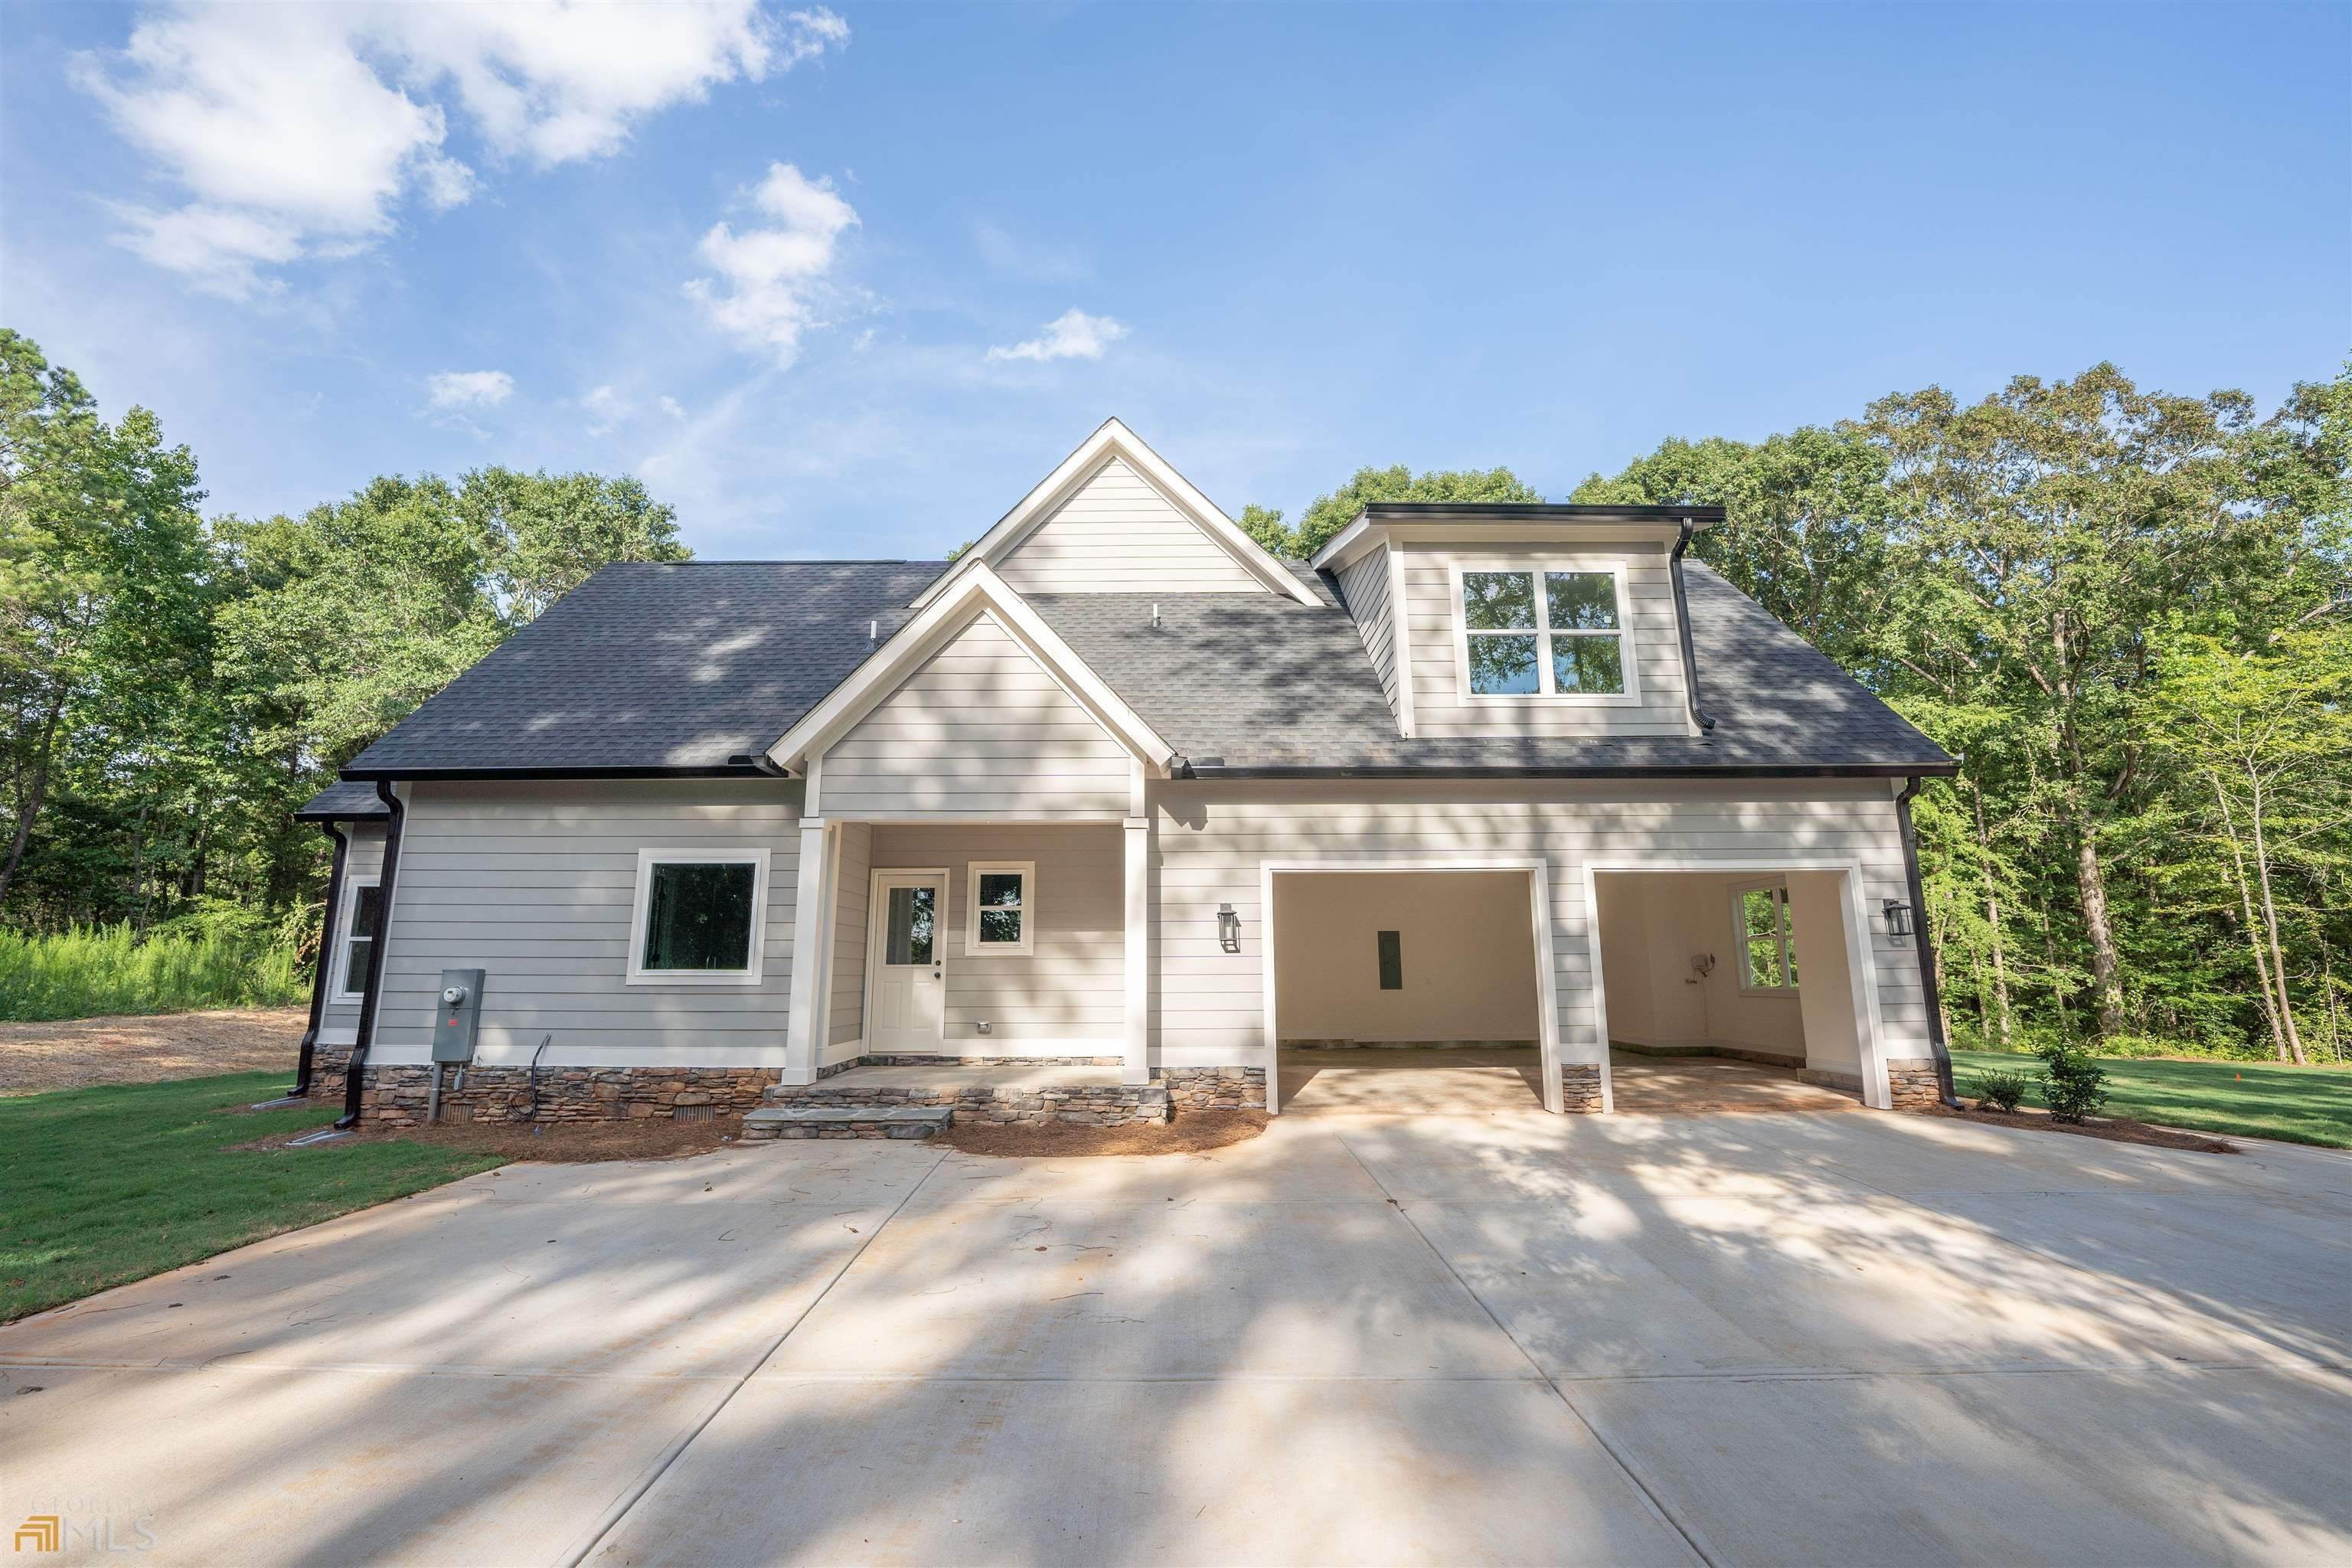 33. Single Family for Sale at Madison, GA 30650